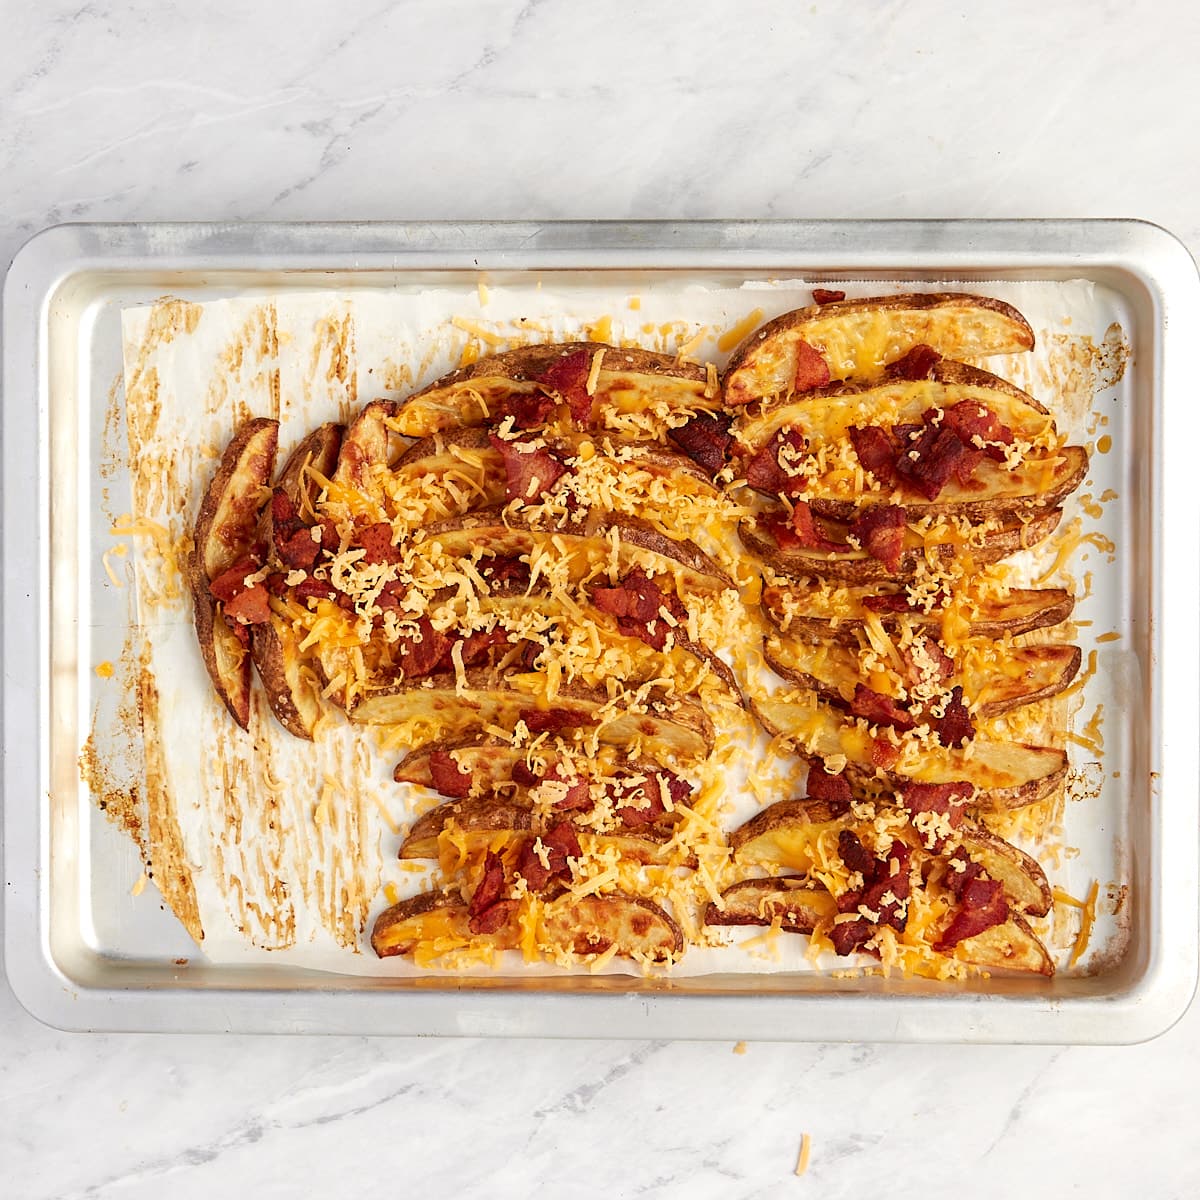 wedges on baking sheet topped with cheese and bacon.